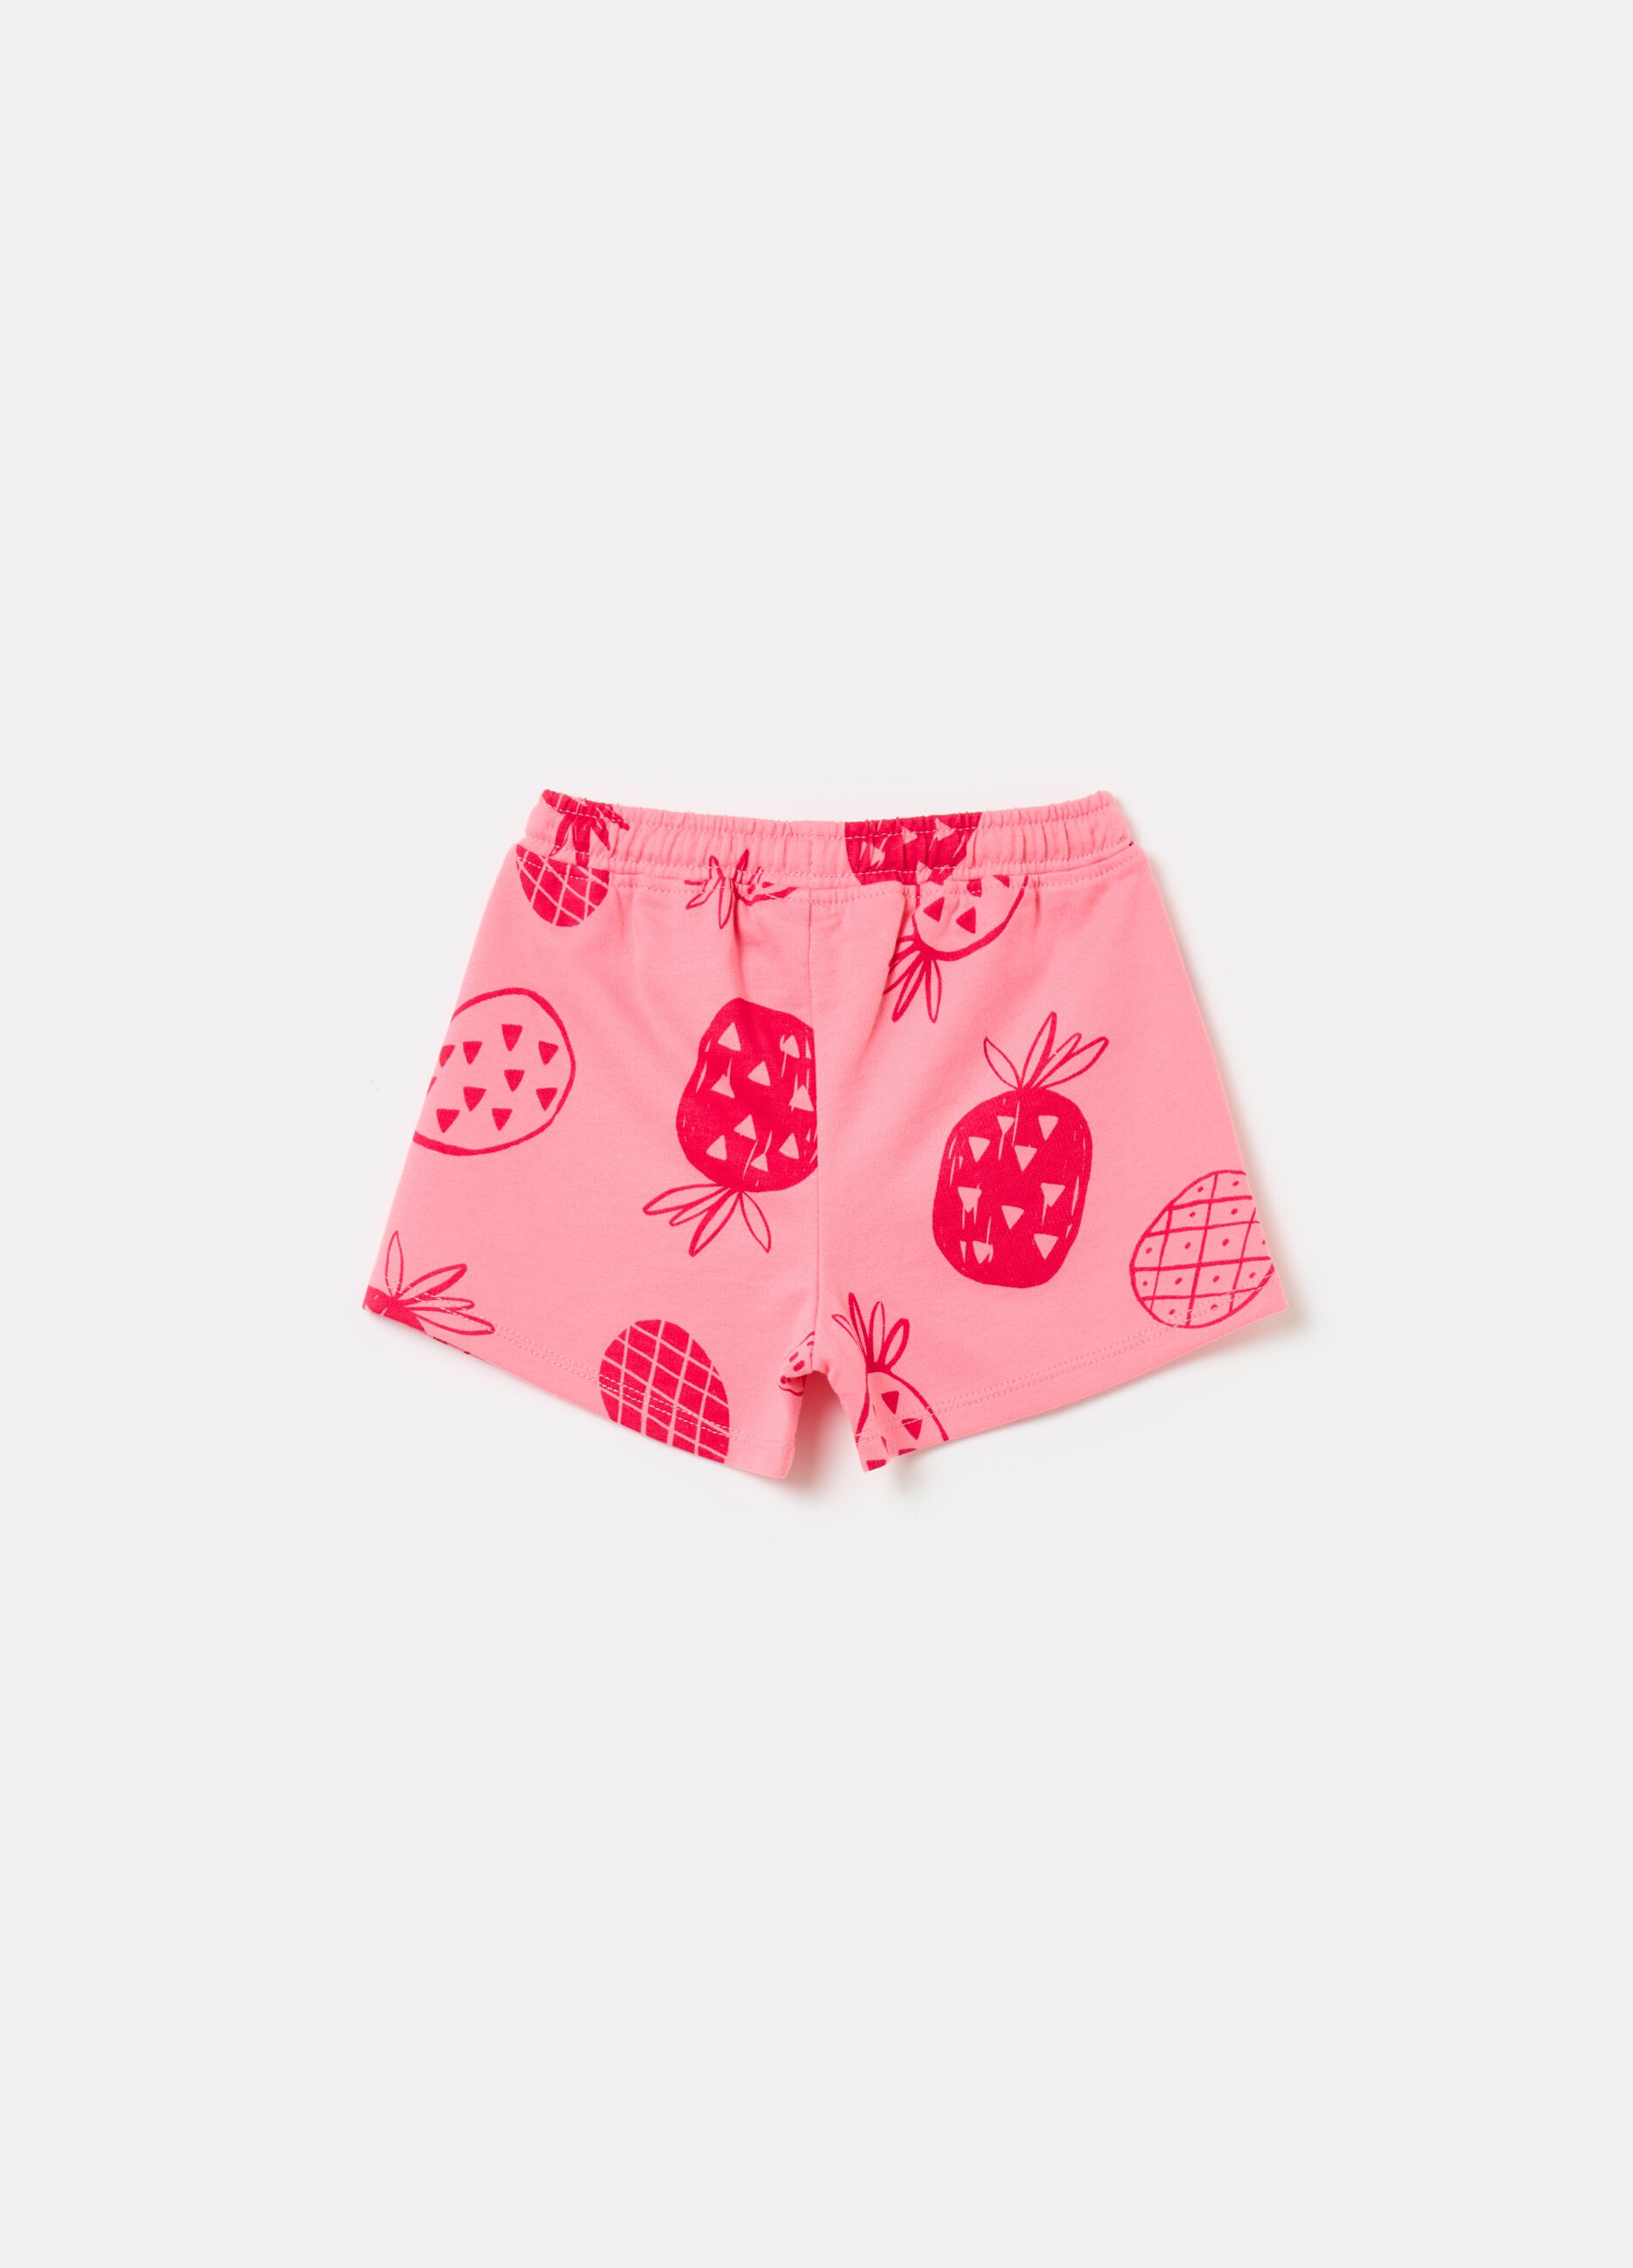 Shorts in French Terry with drawstring and print